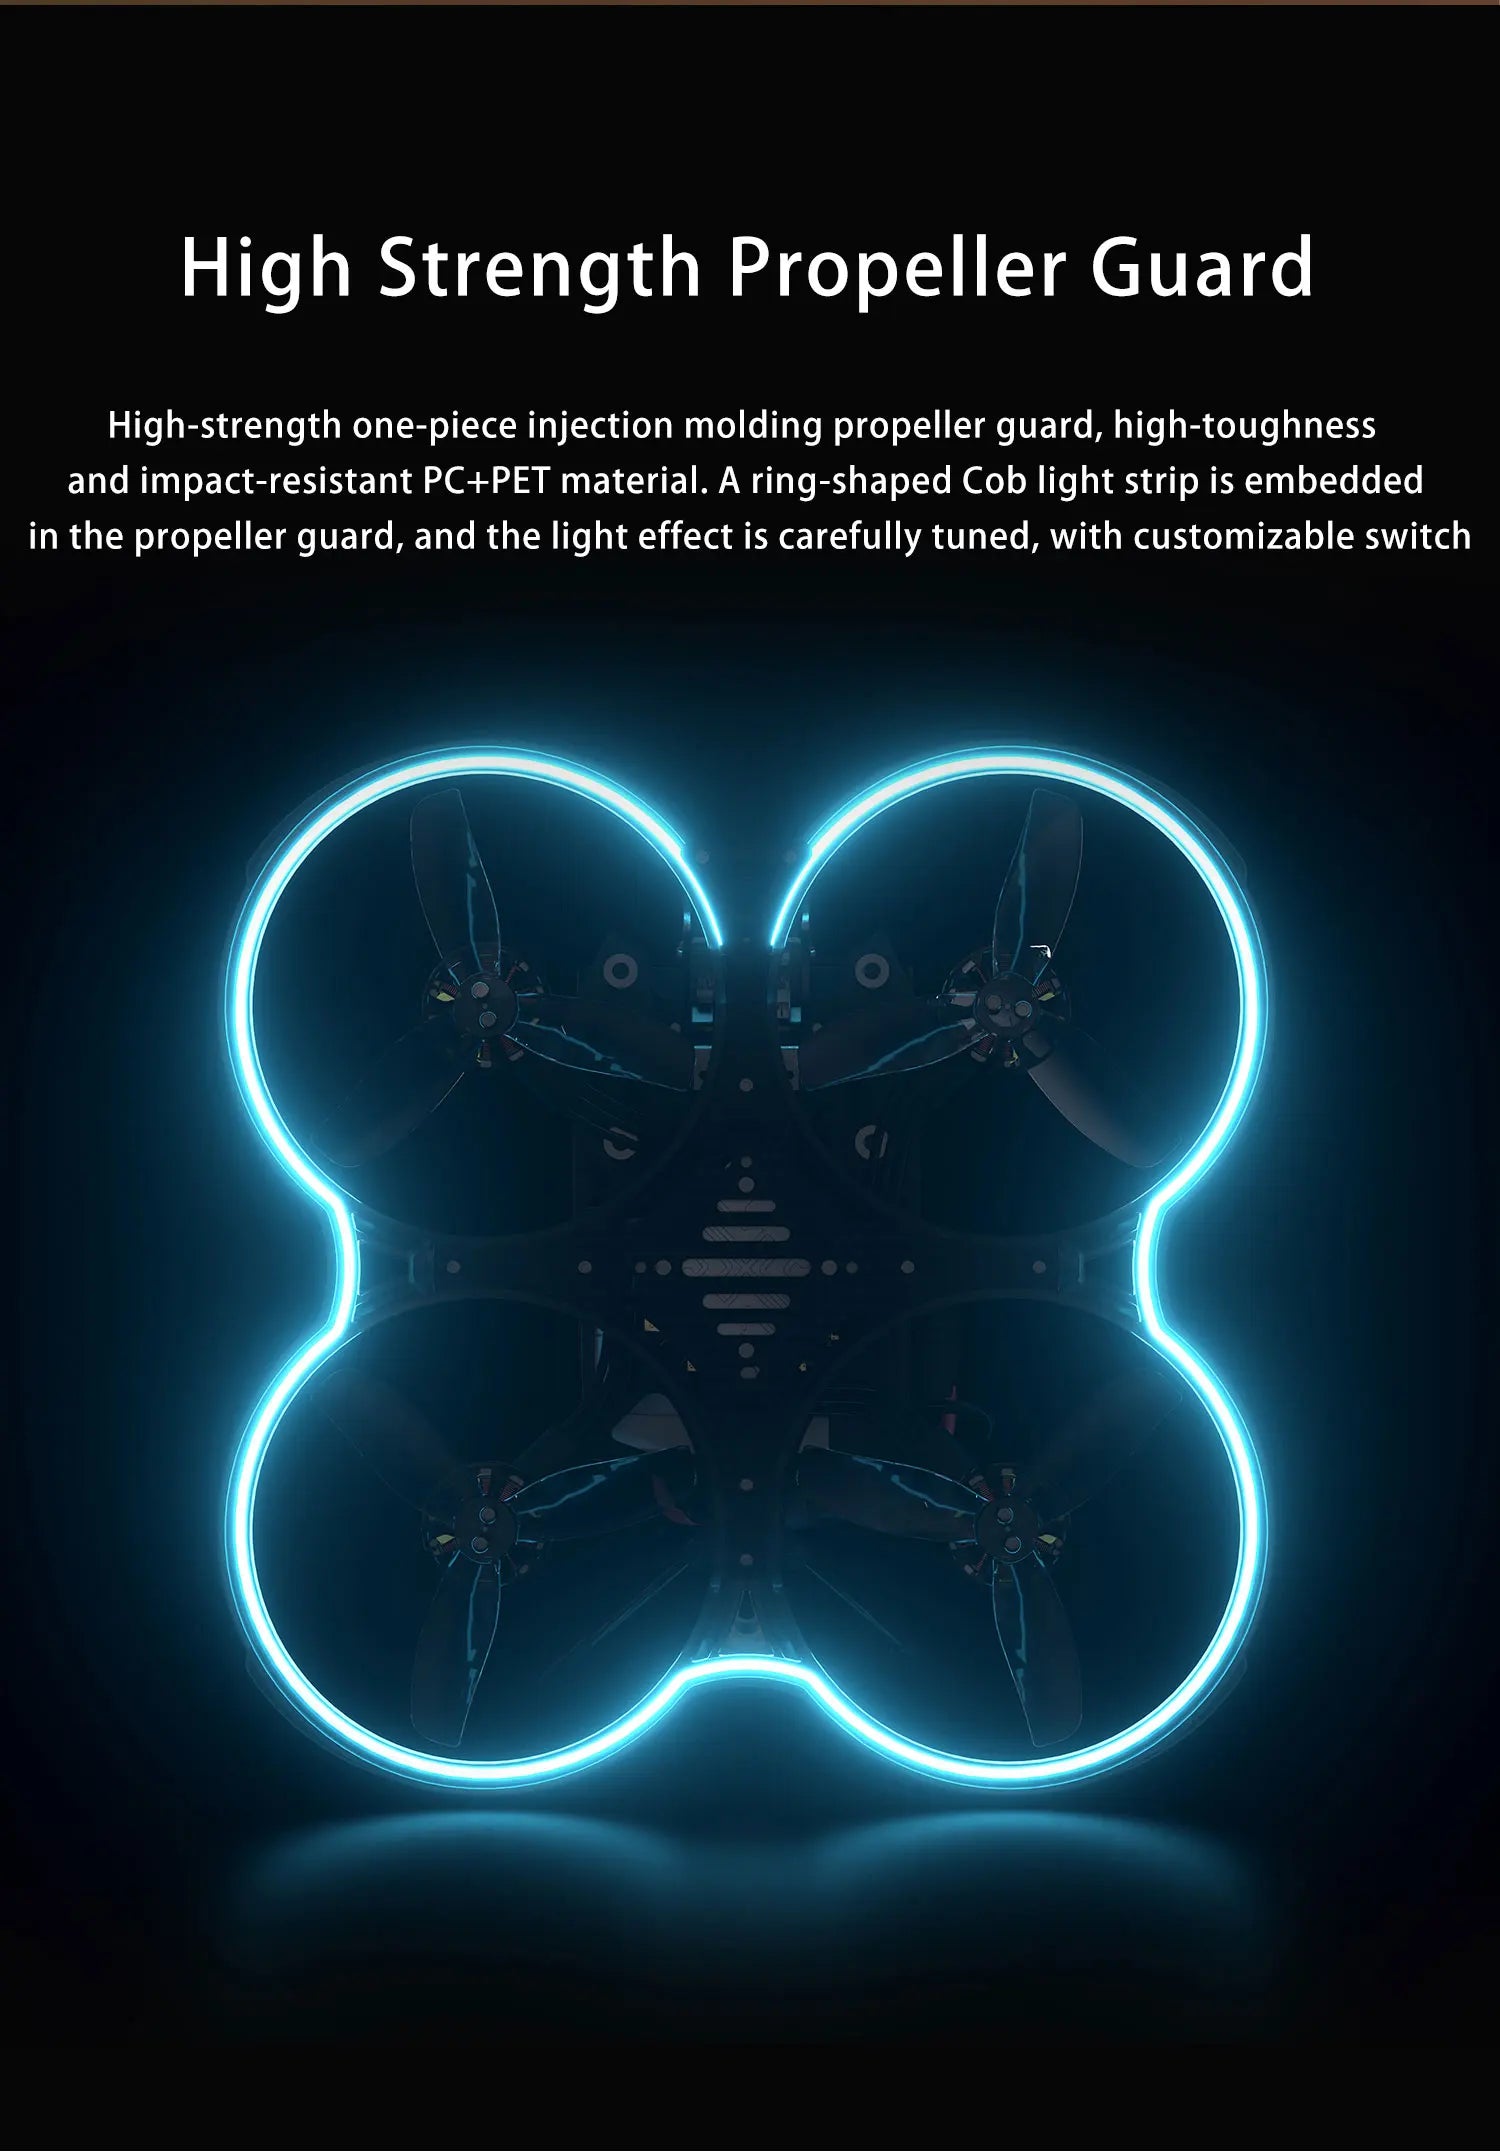 GEPRC Cinebot30 FPV Drone, high-strength propeller guard, high-toughness and impact-resistant